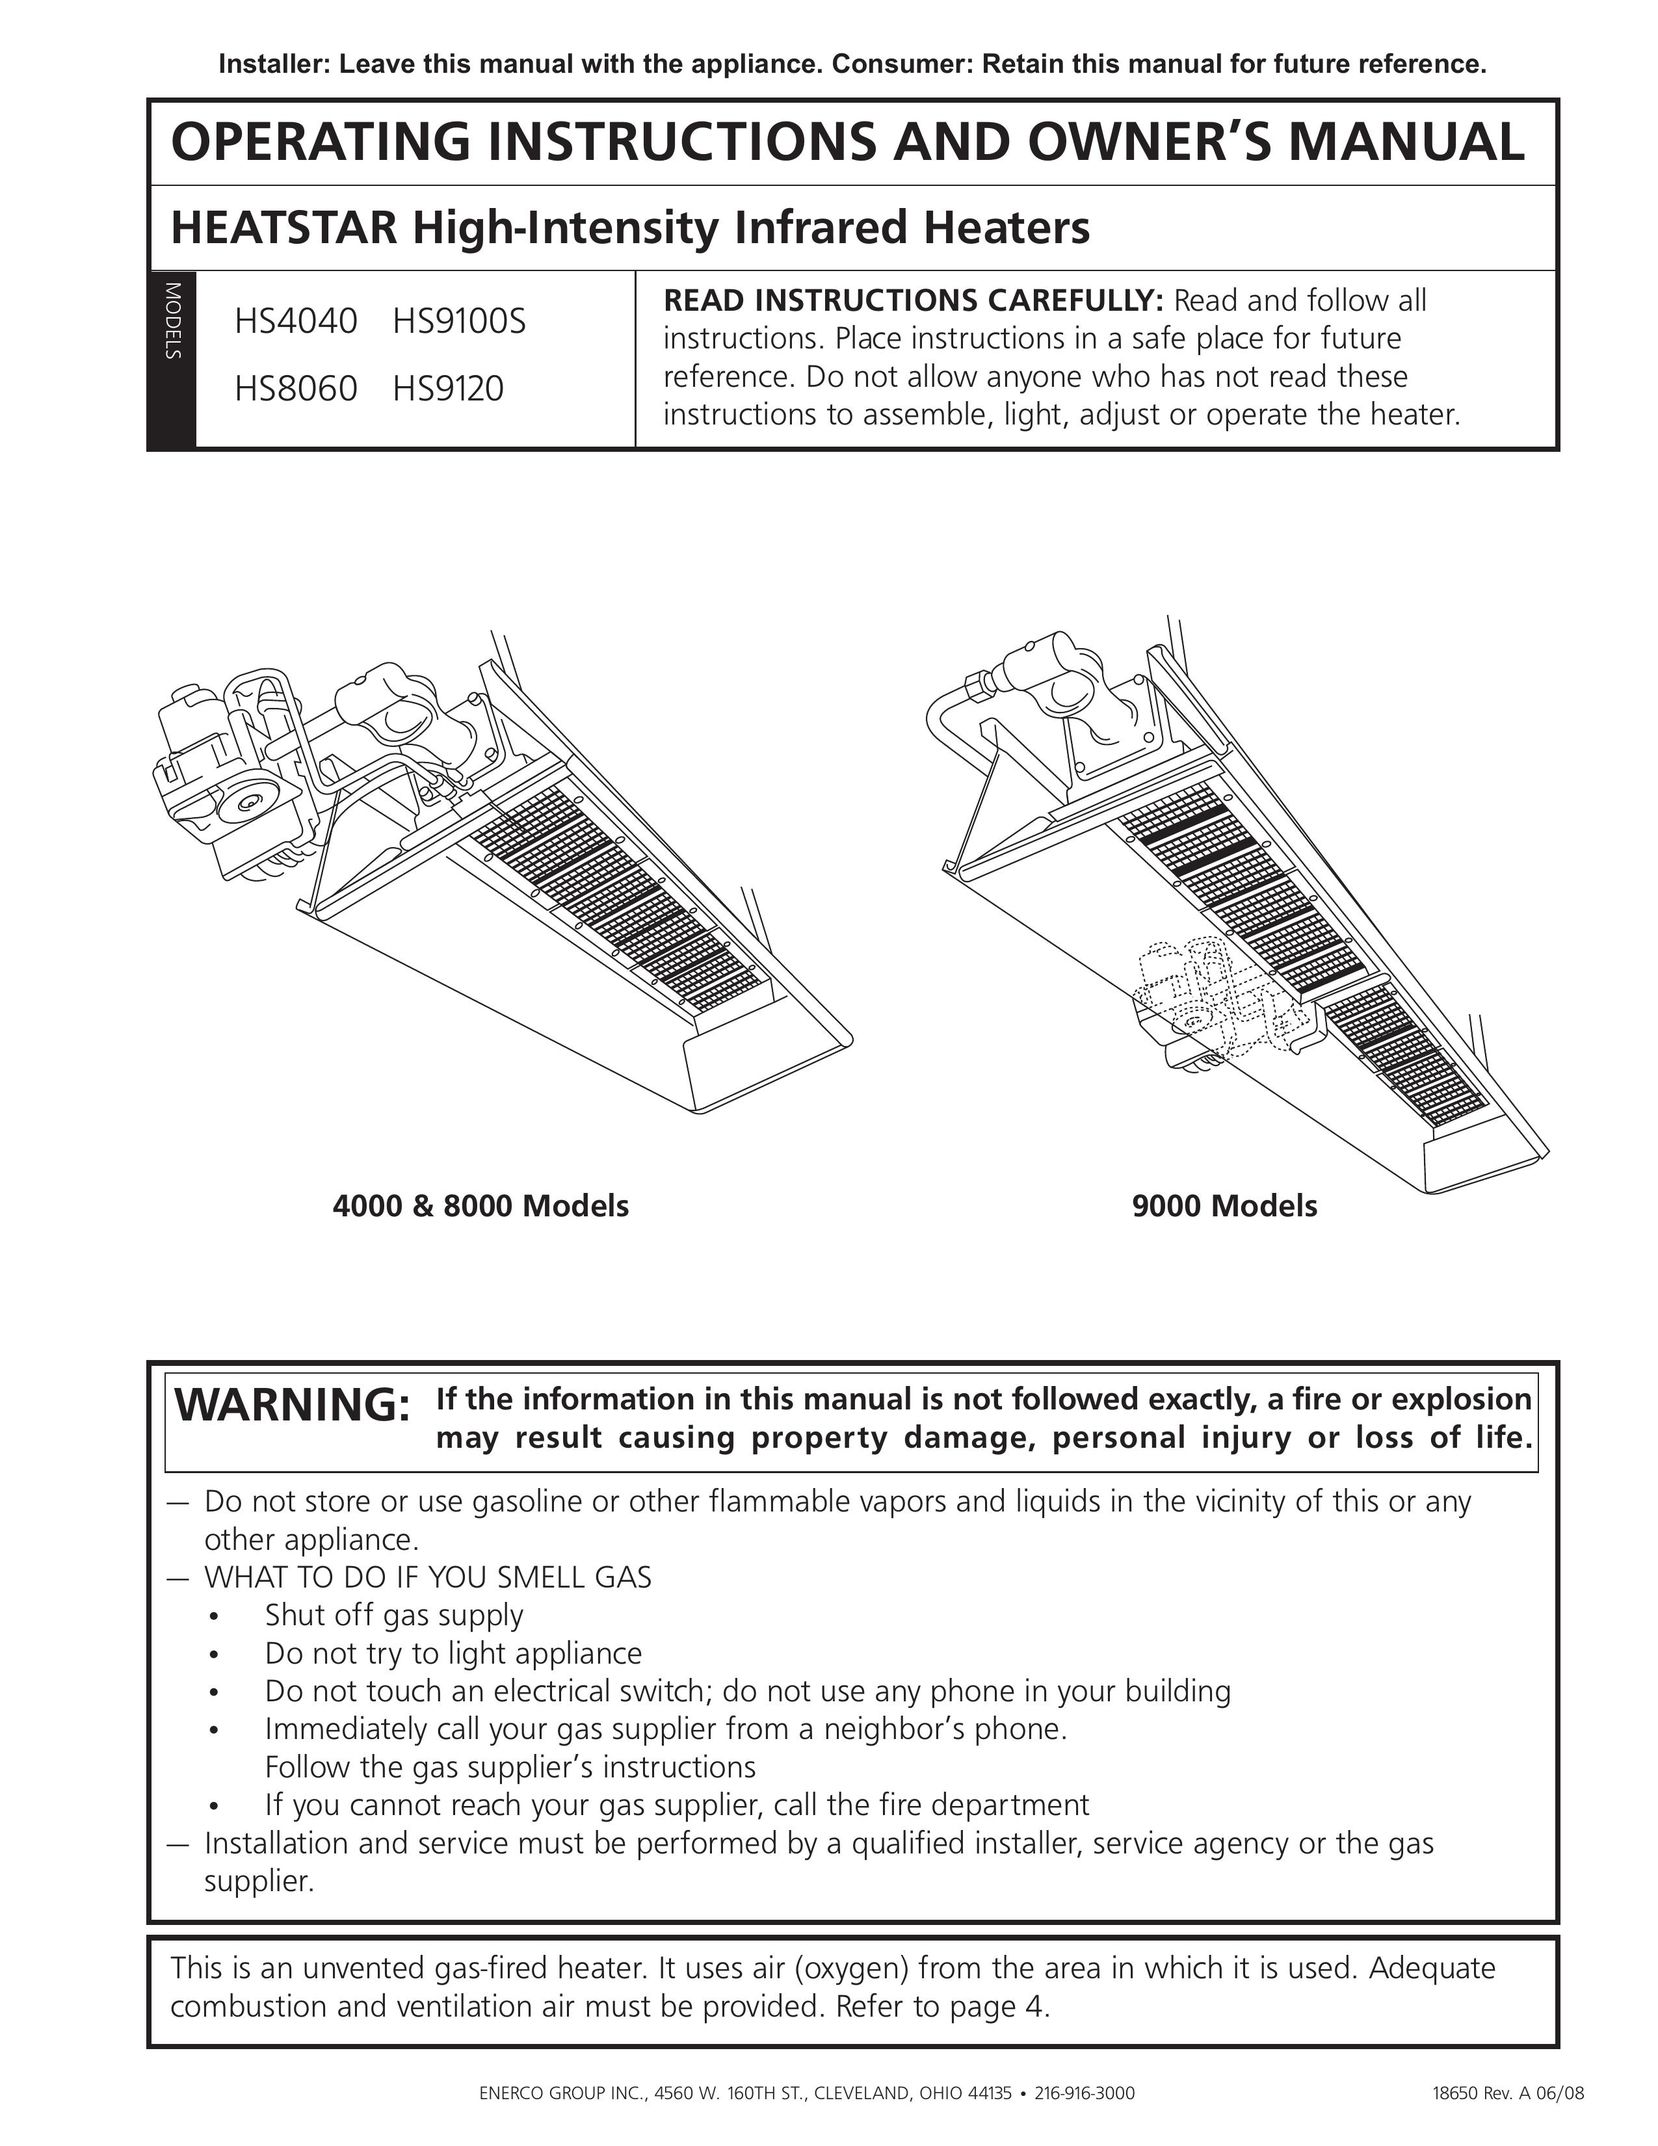 Enerco HS4040 Electric Heater User Manual